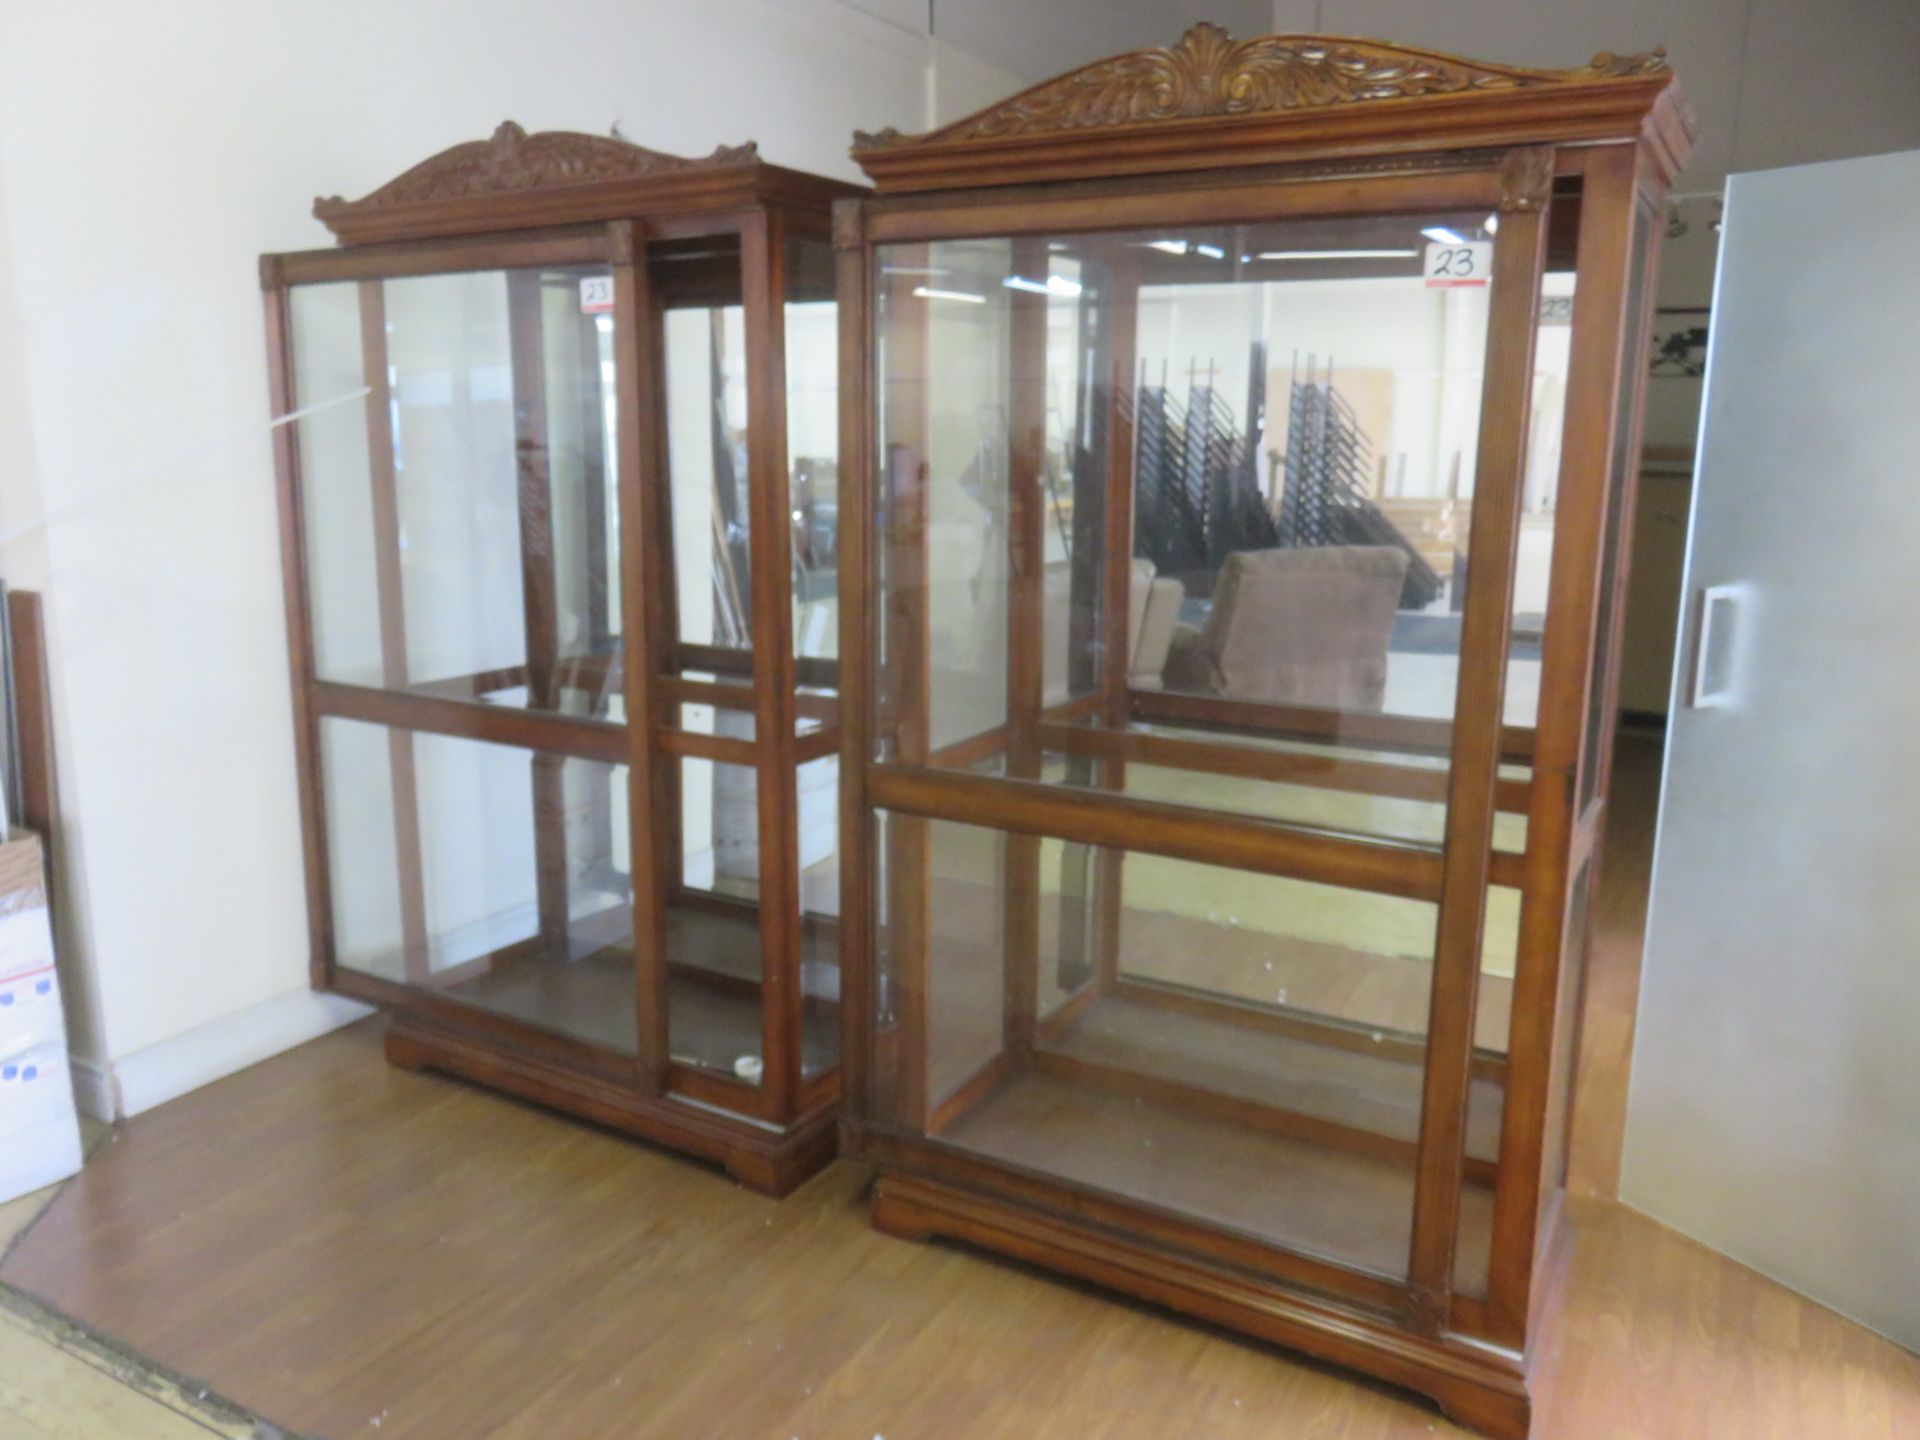 MAHOGANY APPR 20" X 4' X 7' H SLIDING DOOR CURIO CABINET W/ 4-GLASS SHELVES (IN WAREHOUSE)